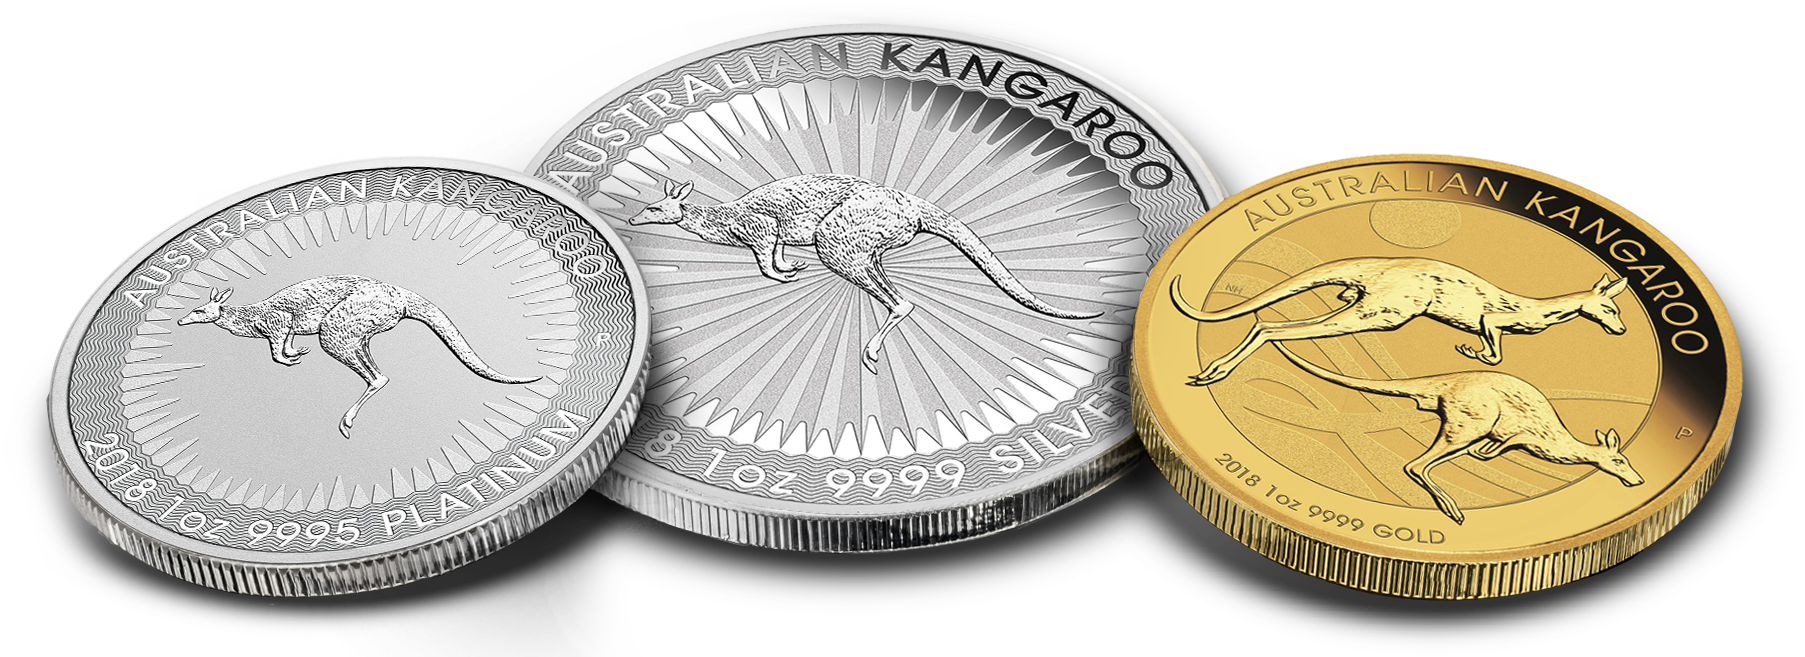 Three Australian Kangaroos, featuring two Silver coins and one Gold coin.